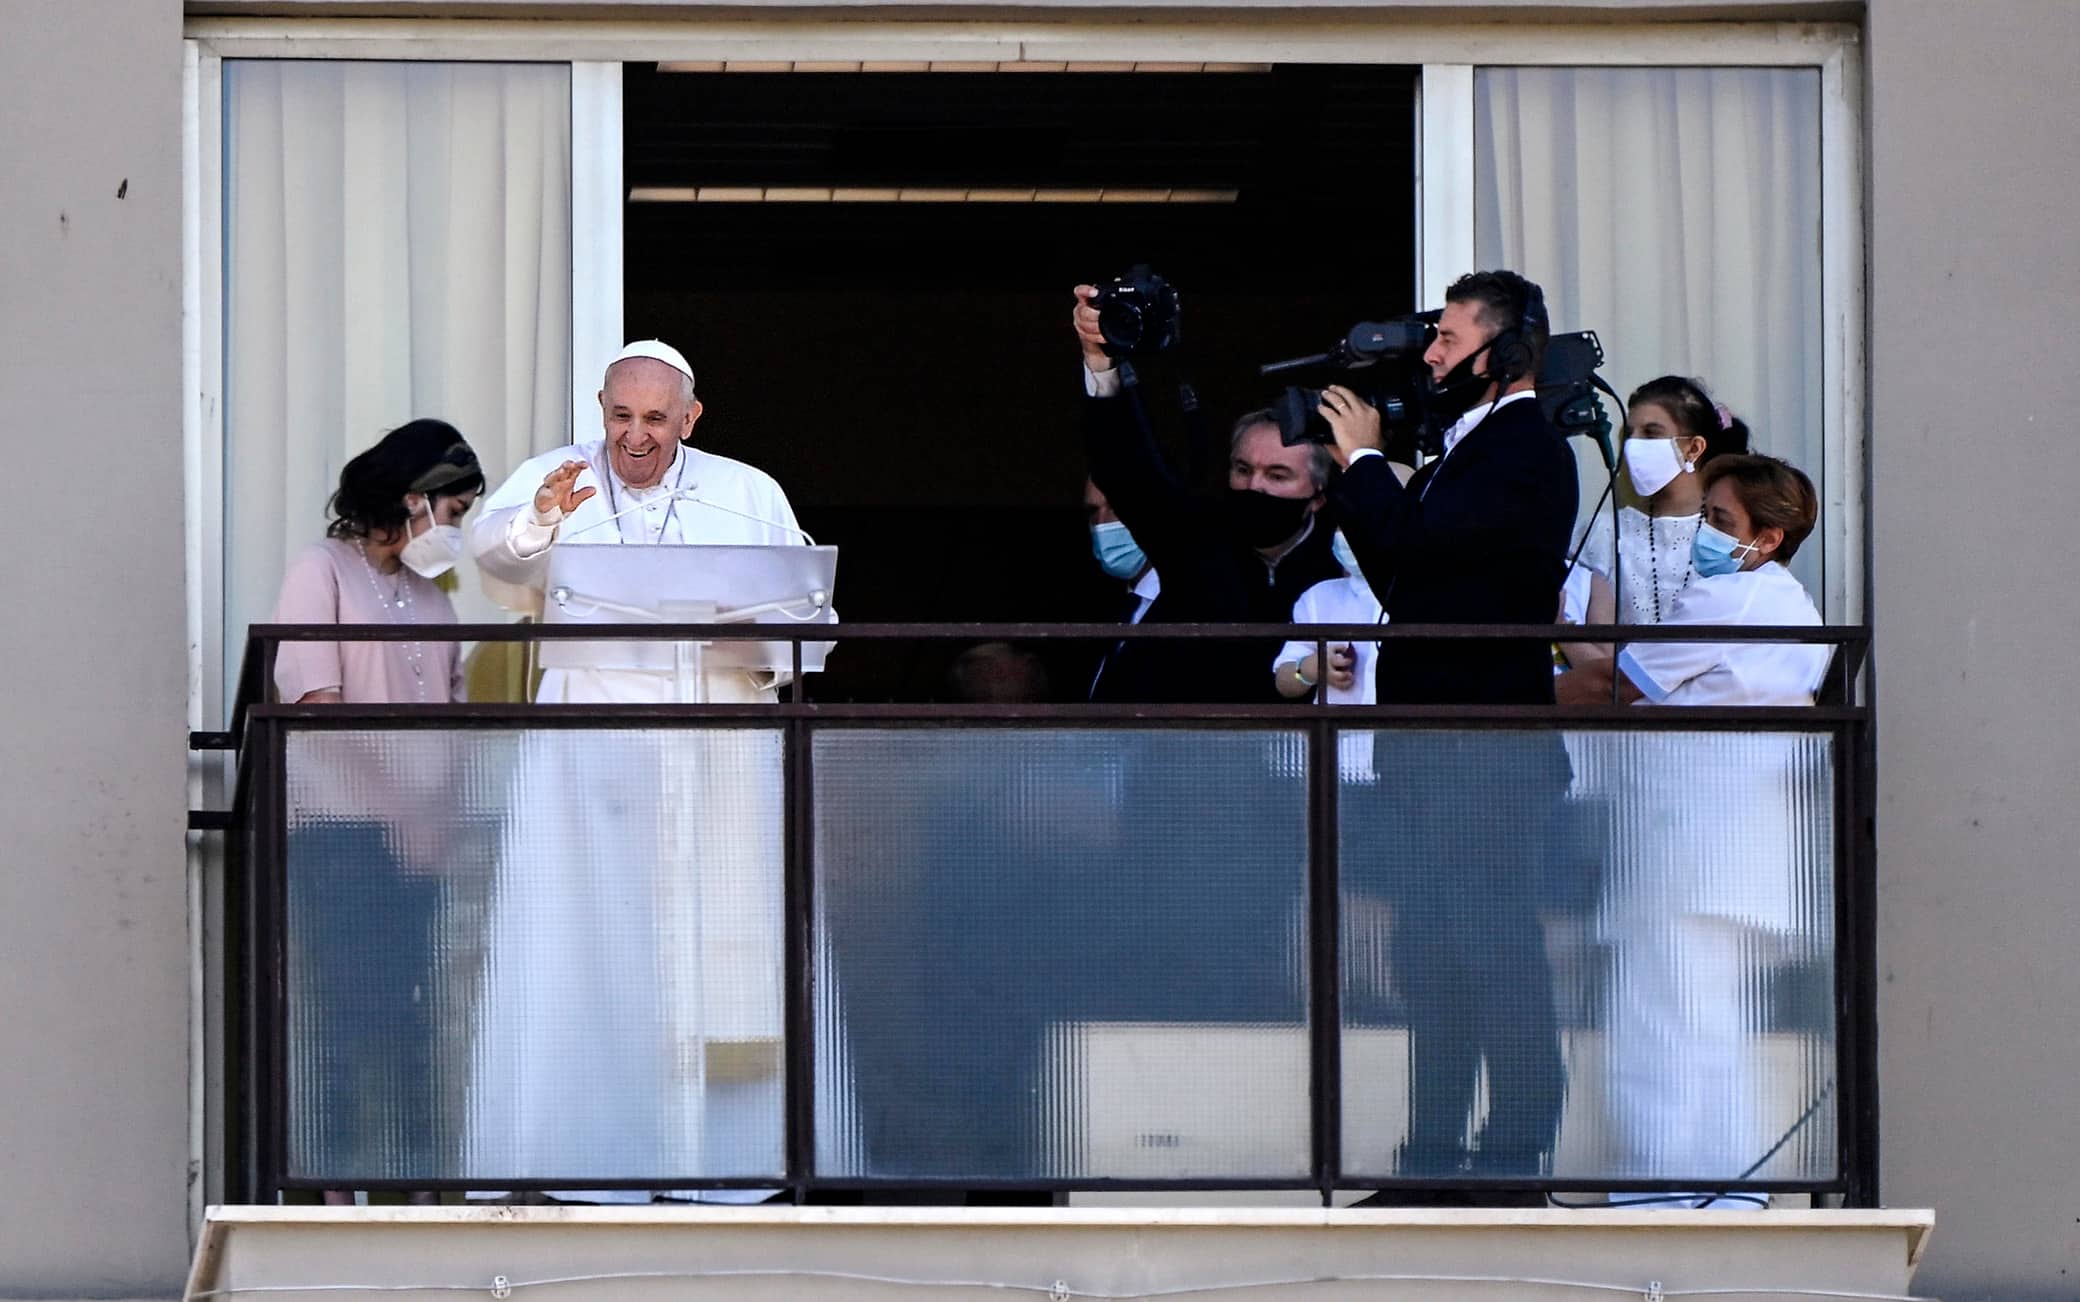 Pope Francis leads his Sunday Angelus prayer from a balcony at the Gemelli hospital where he underwent a scheduled colon surgery on 04 July, Rome, Italy, 11 July 2021. ANSA/RICCARDO ANTIMIANI